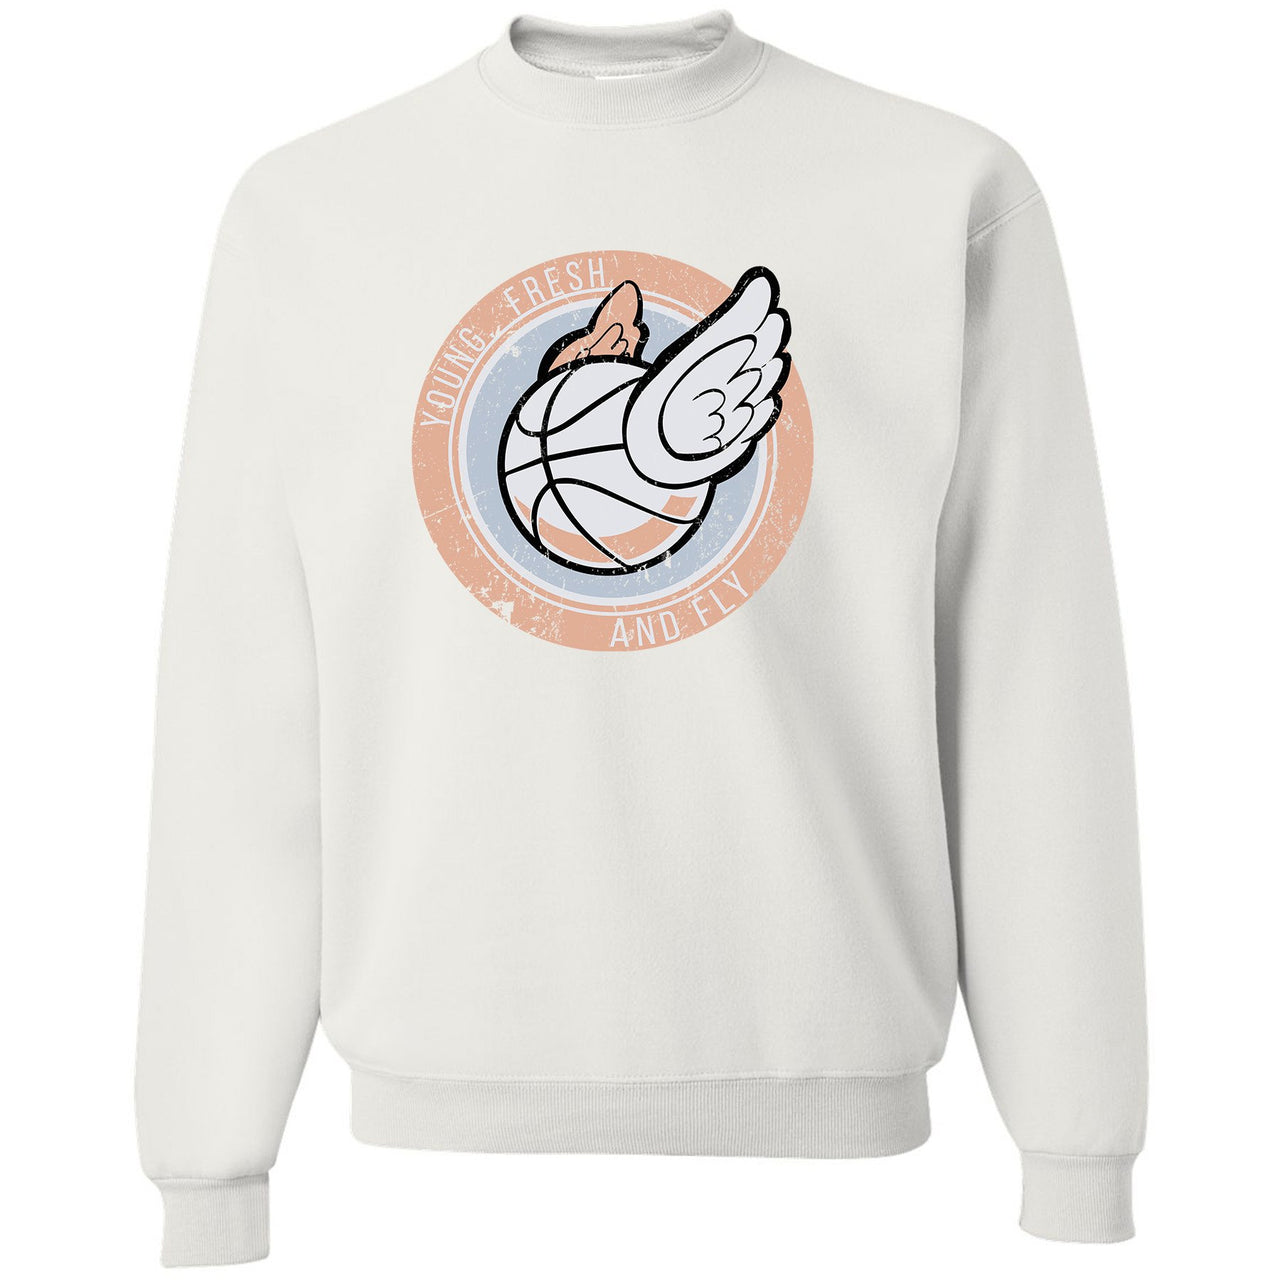 Inertia 700s Crewneck Sweater | Young Fresh and Fly, White